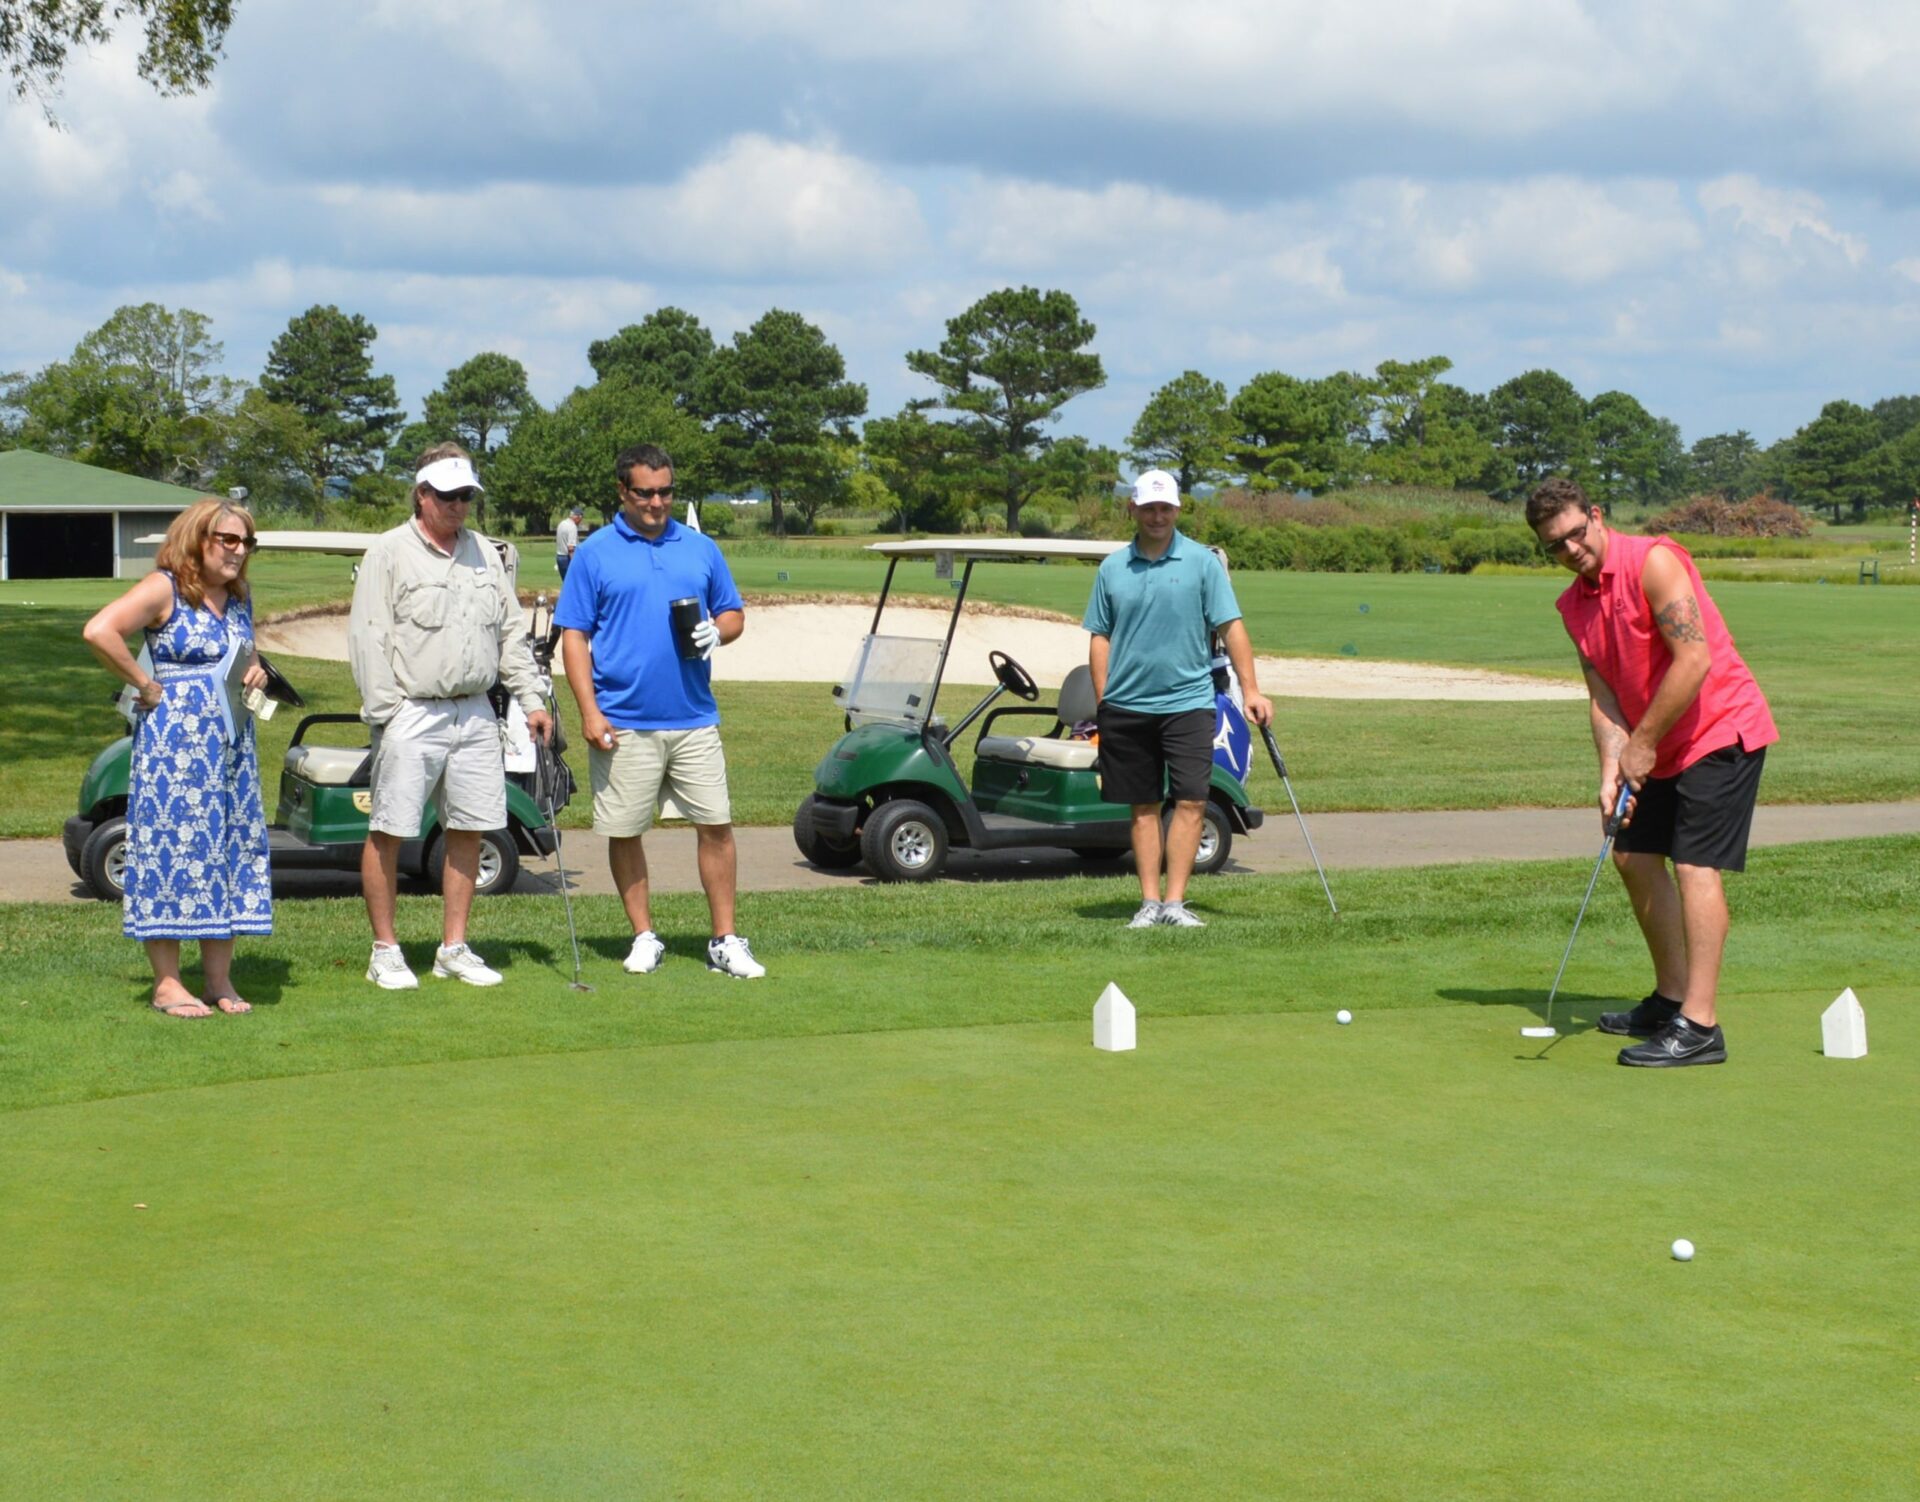 Group of 5 Contractors for a Cause members golfing